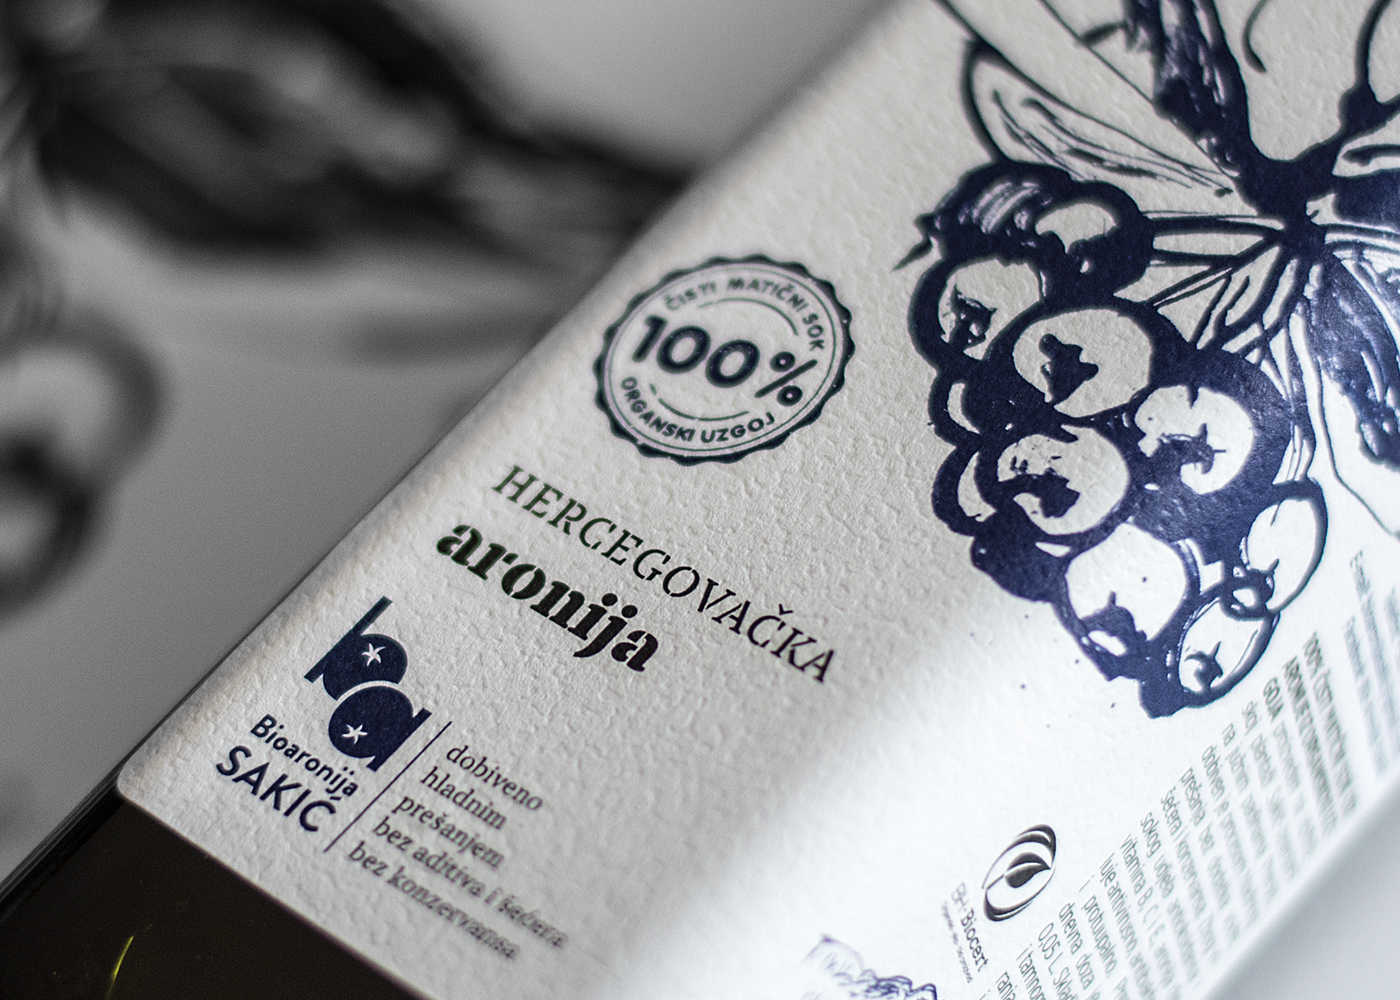 The brand identity and packaging design for an all-natural chokeberry juice 